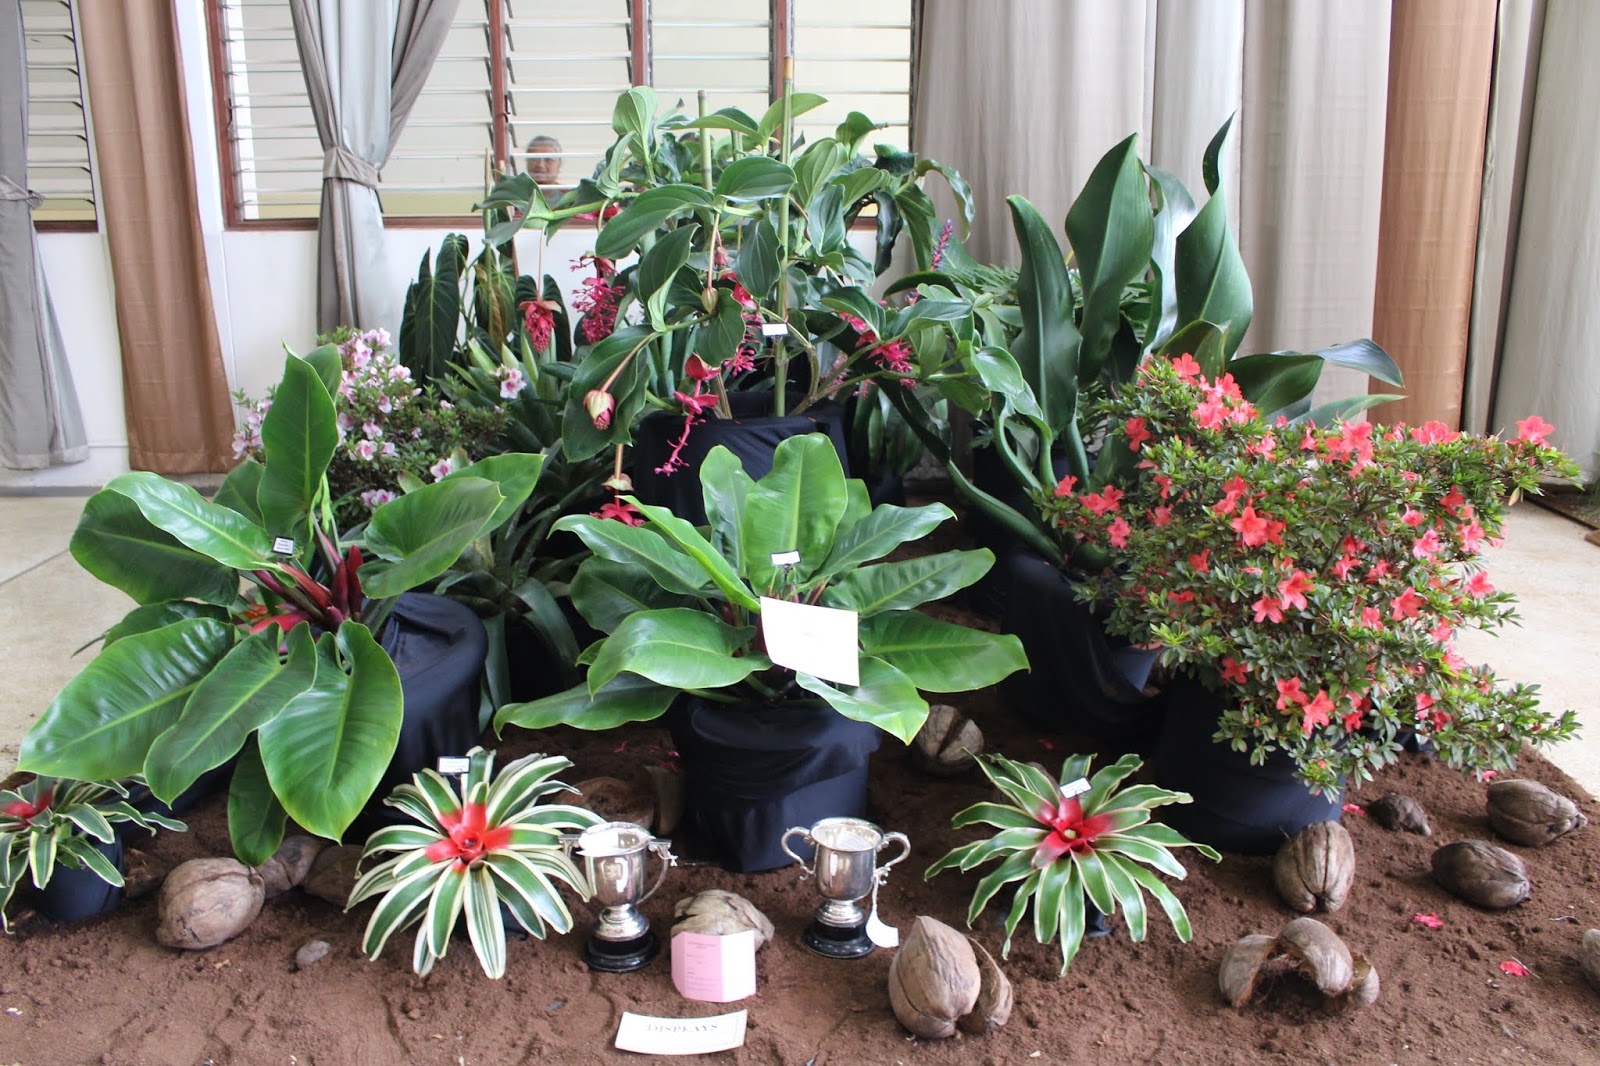 Attend the 2019 KHS Nairobi District Flower and Plant Show